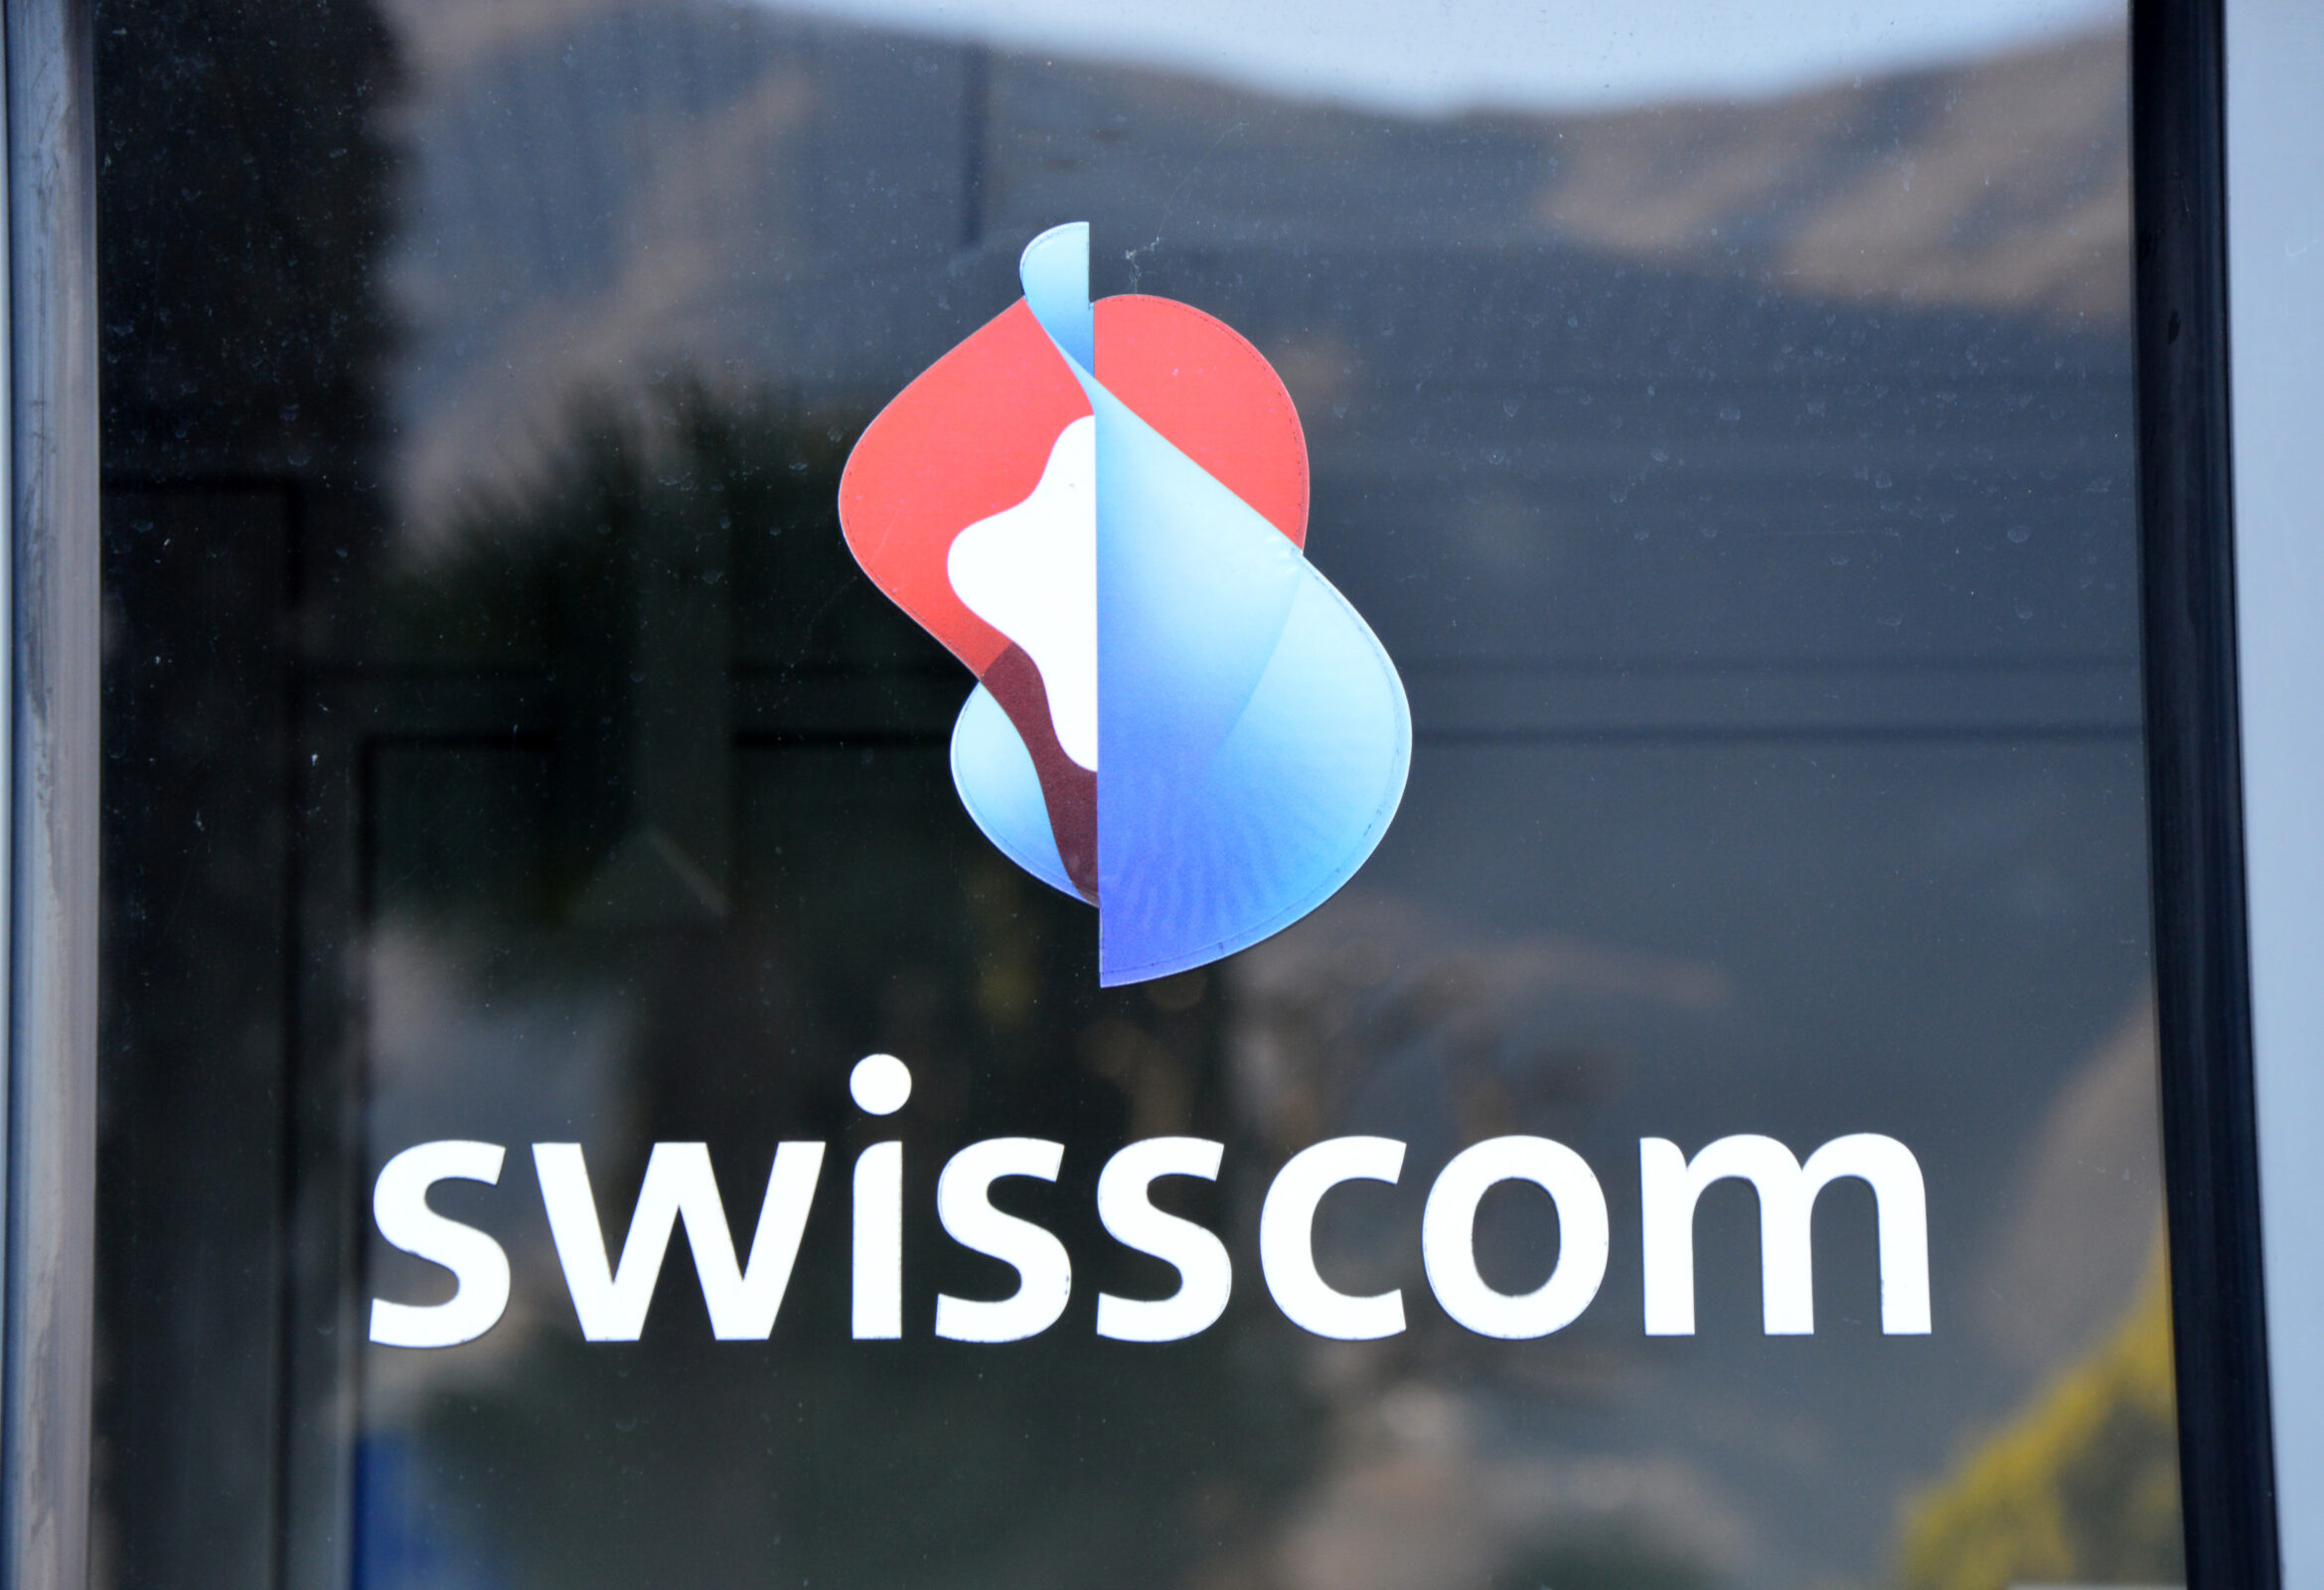 “COMCO is slowing down the network extension times,” says Swisccom